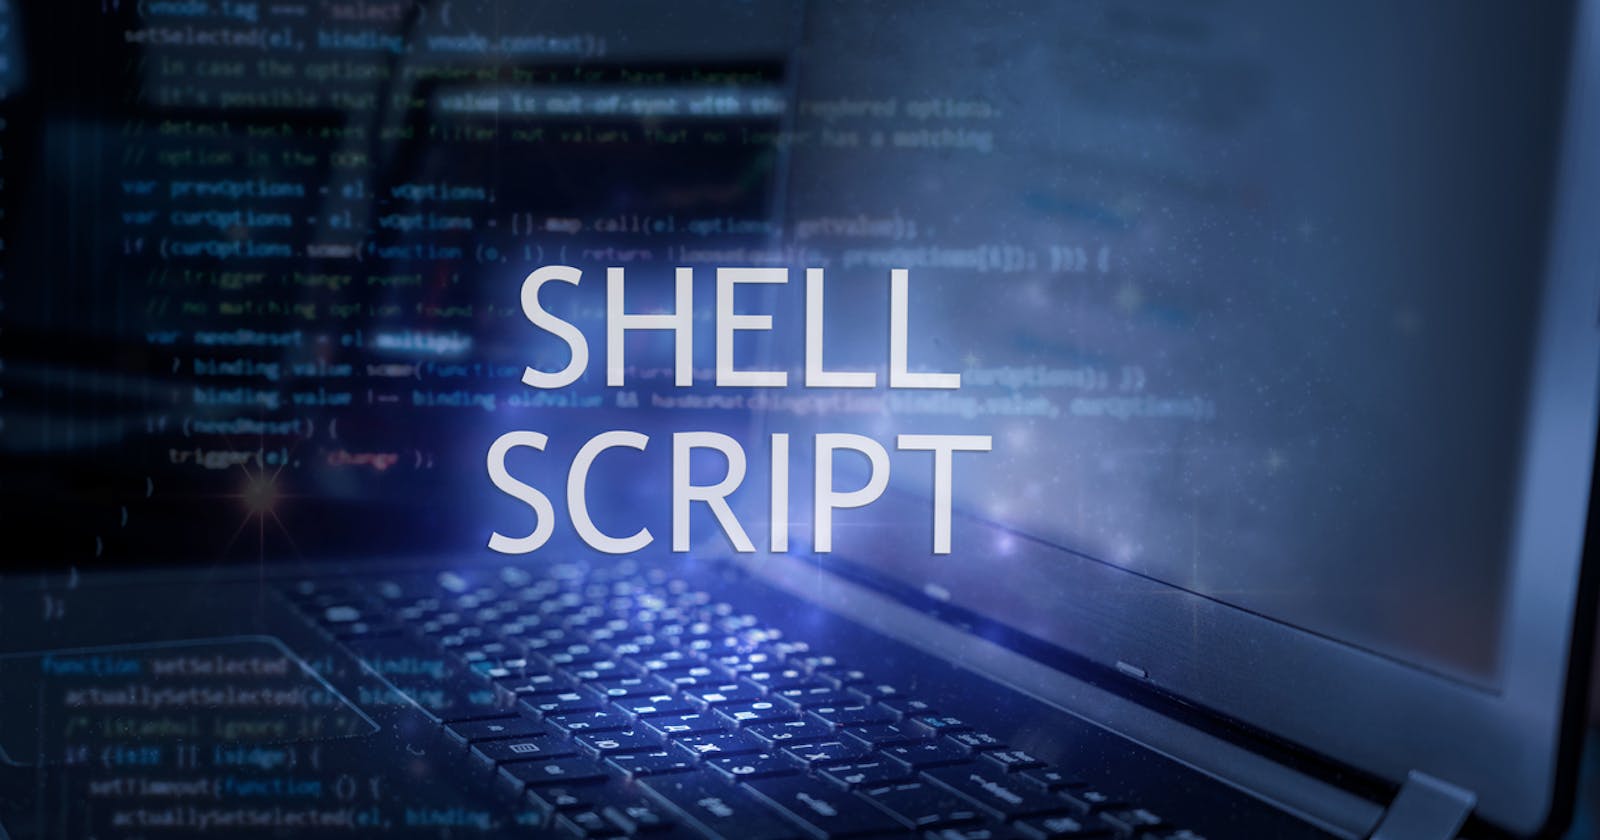 Let's start with Shell scripting